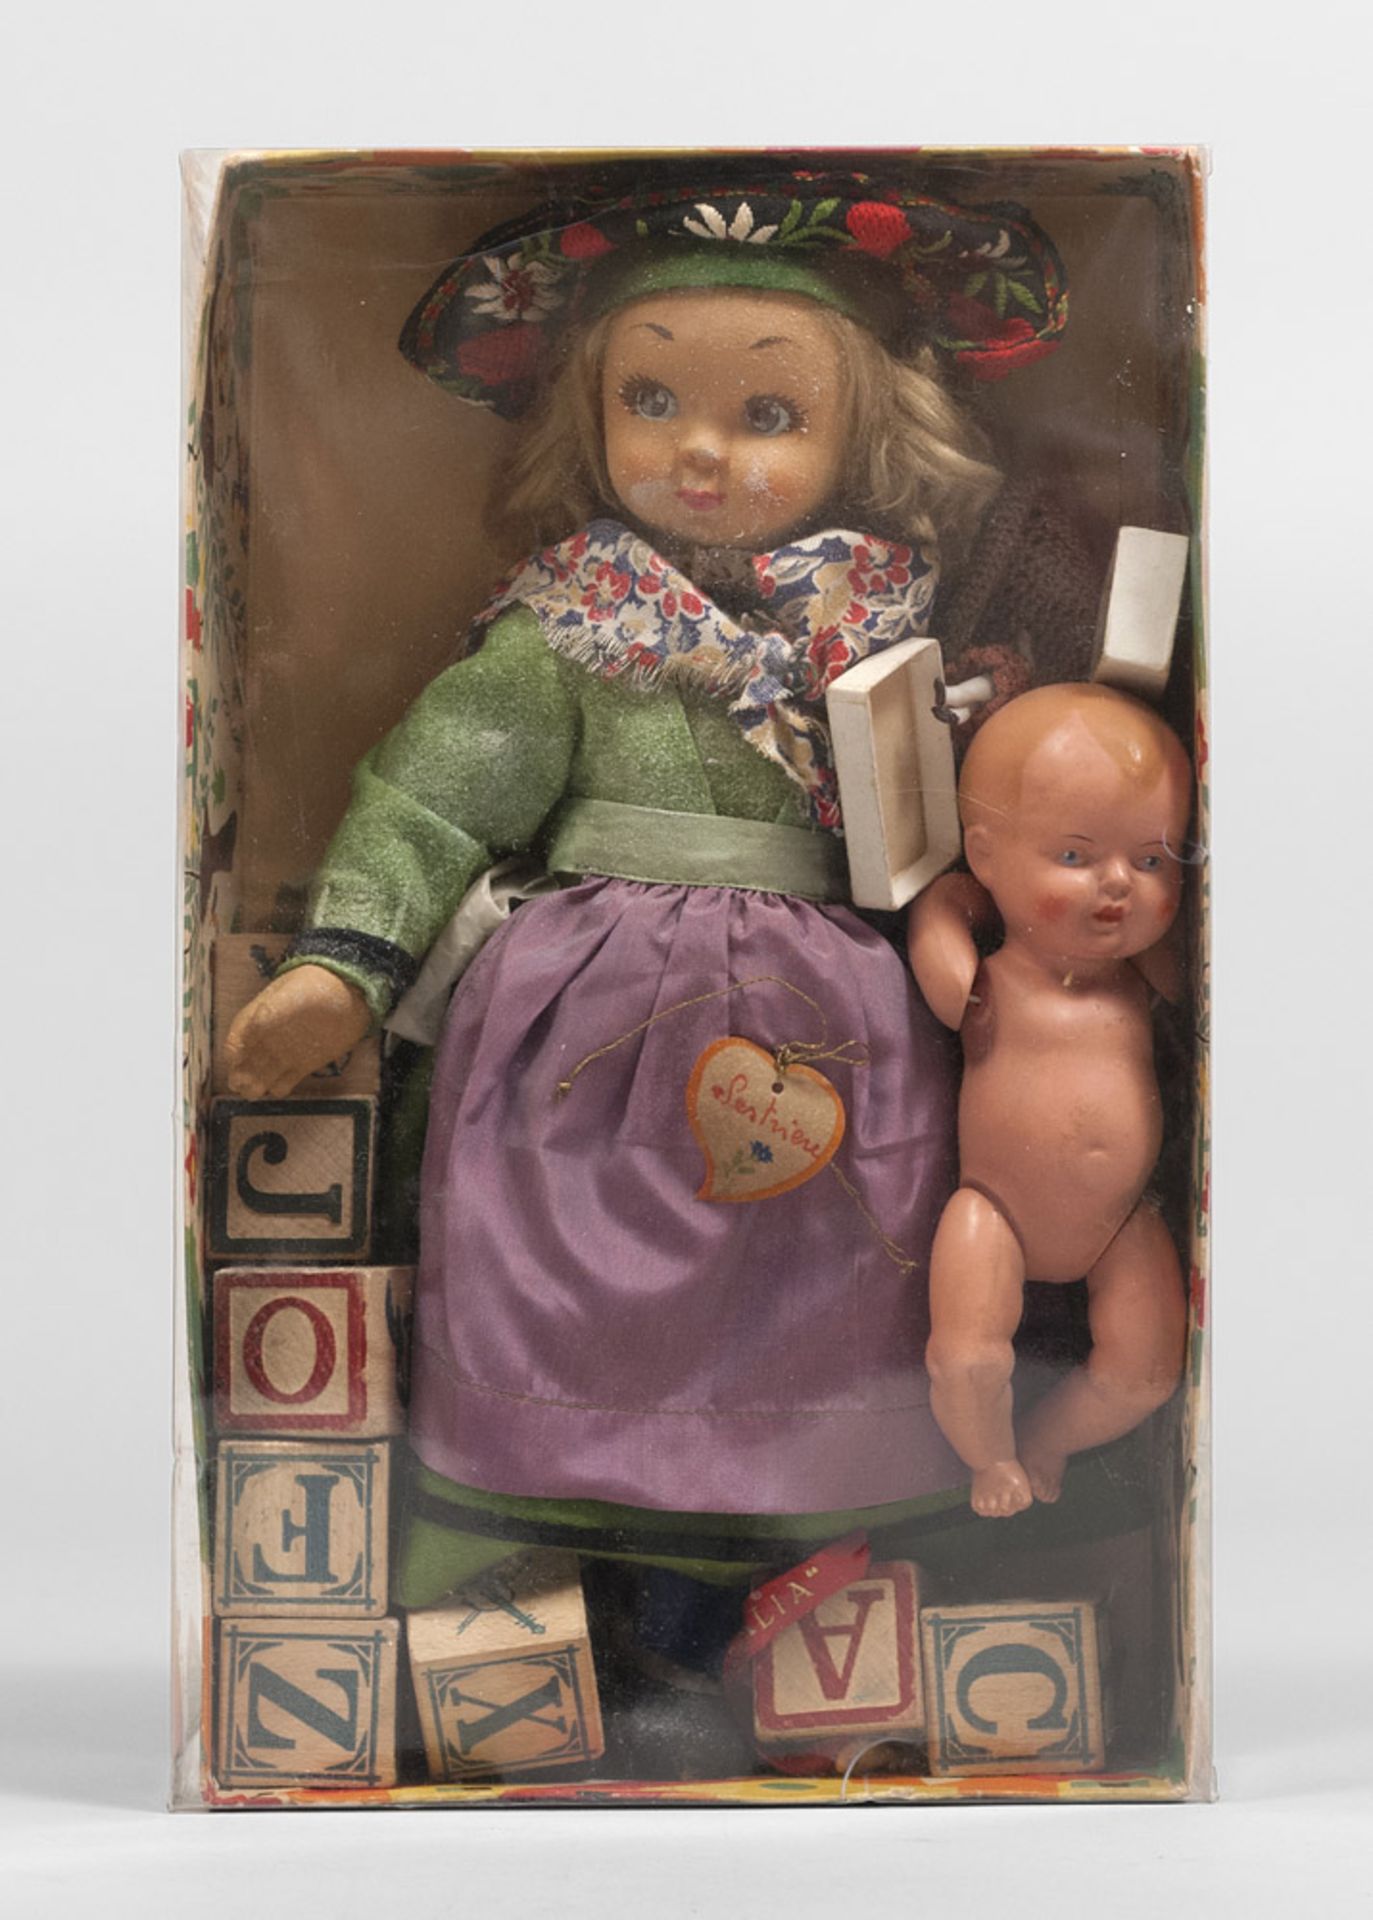 Doll, mid 20th century. Measures wrapping cm. 30 x 19 x 8.